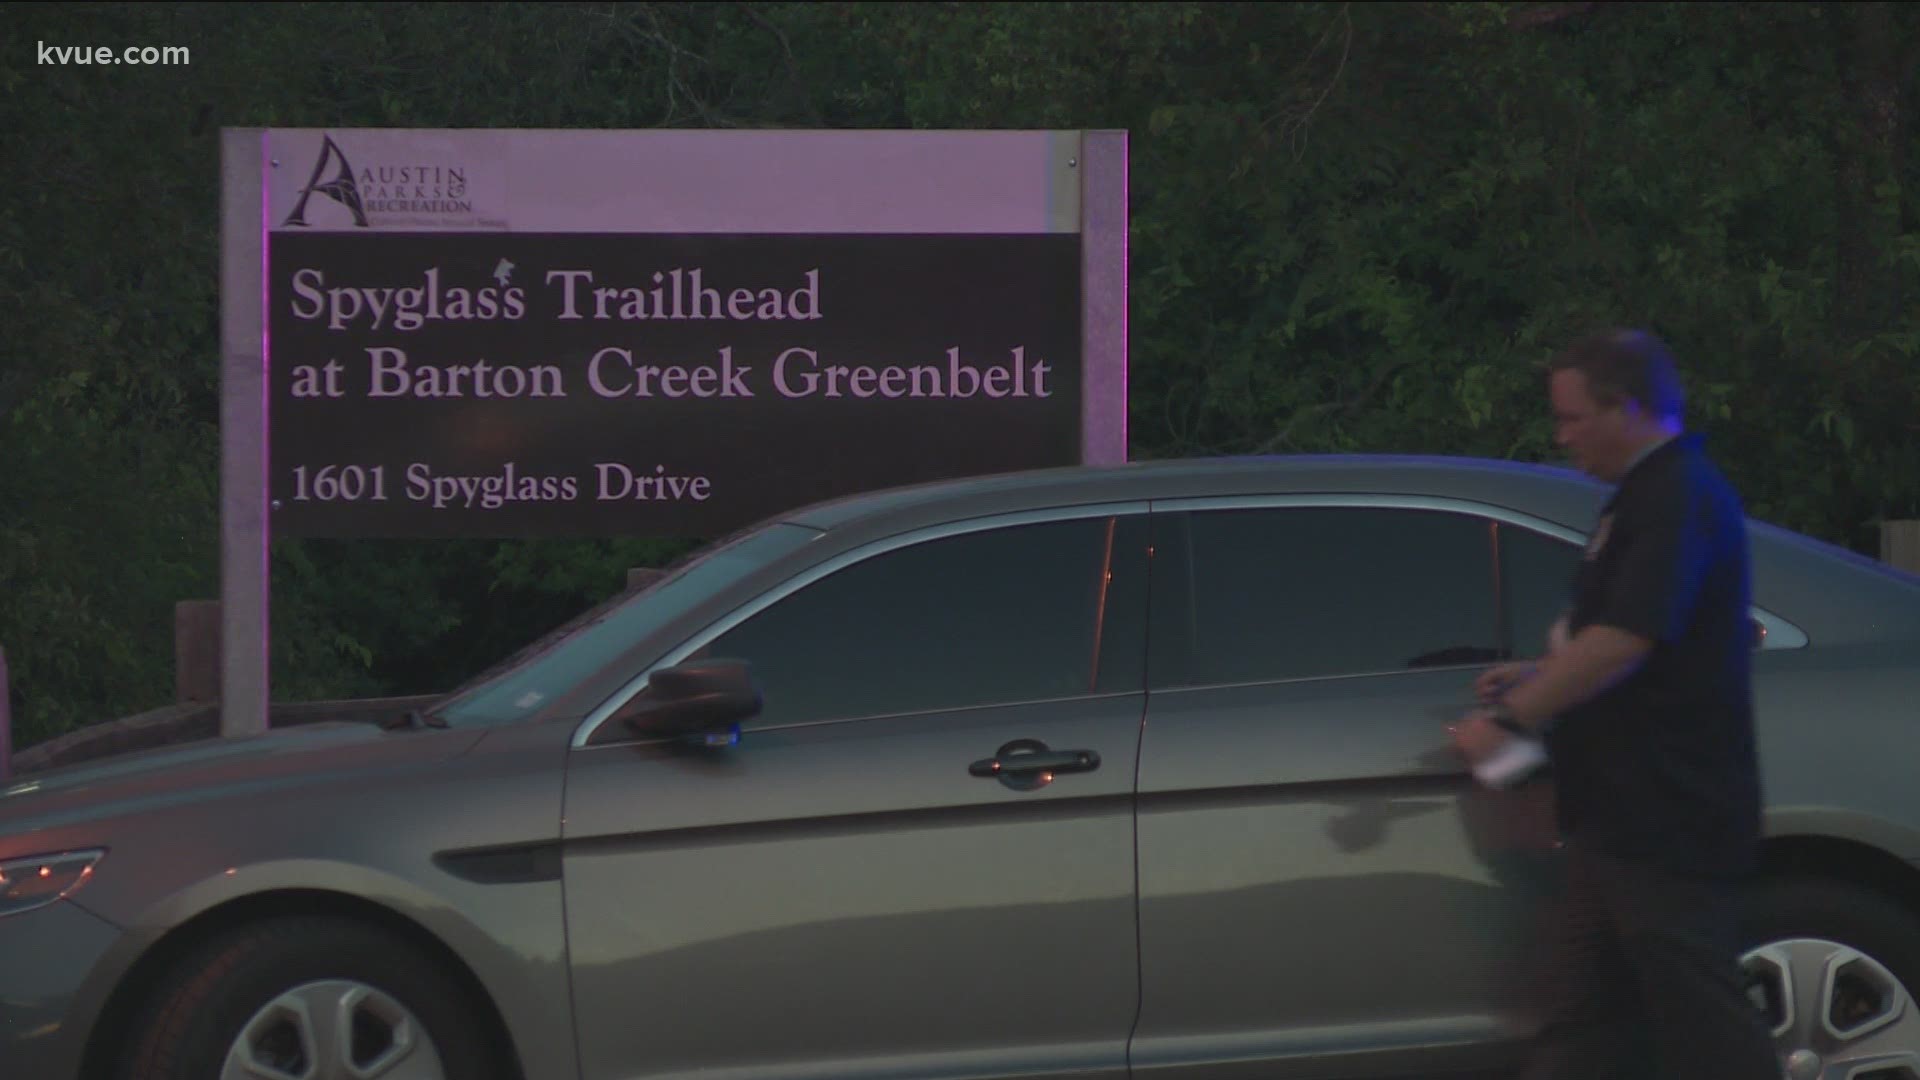 One person died after medics say they fell from the Barton Creek Greenbelt.